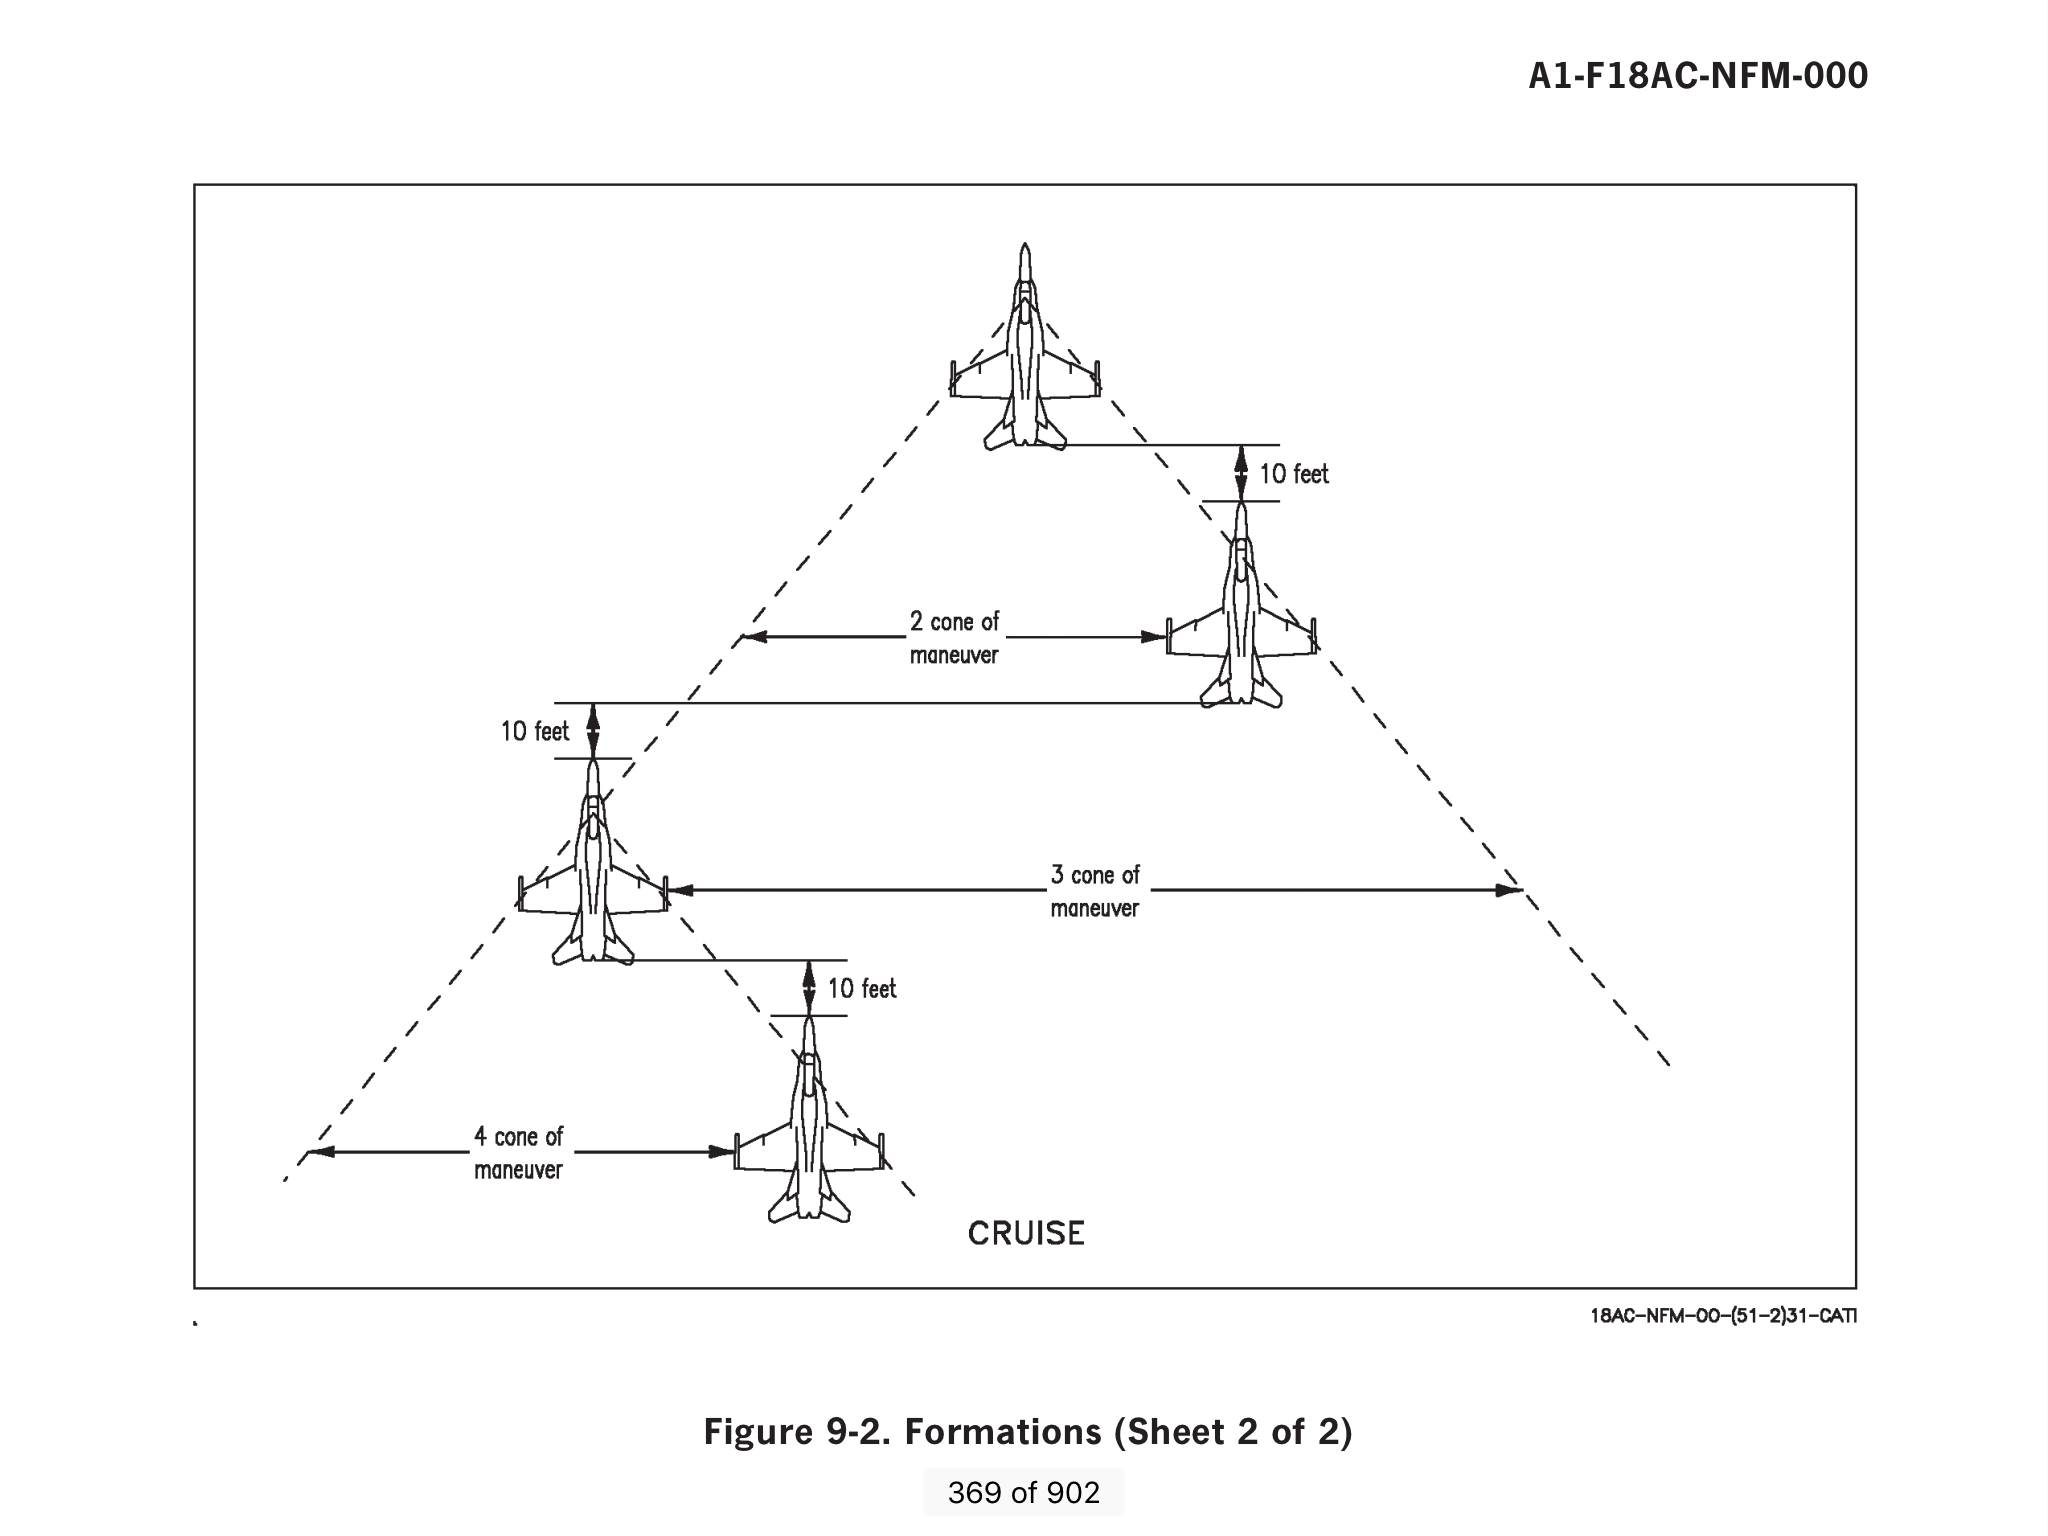 F-18 Section Formation Positions